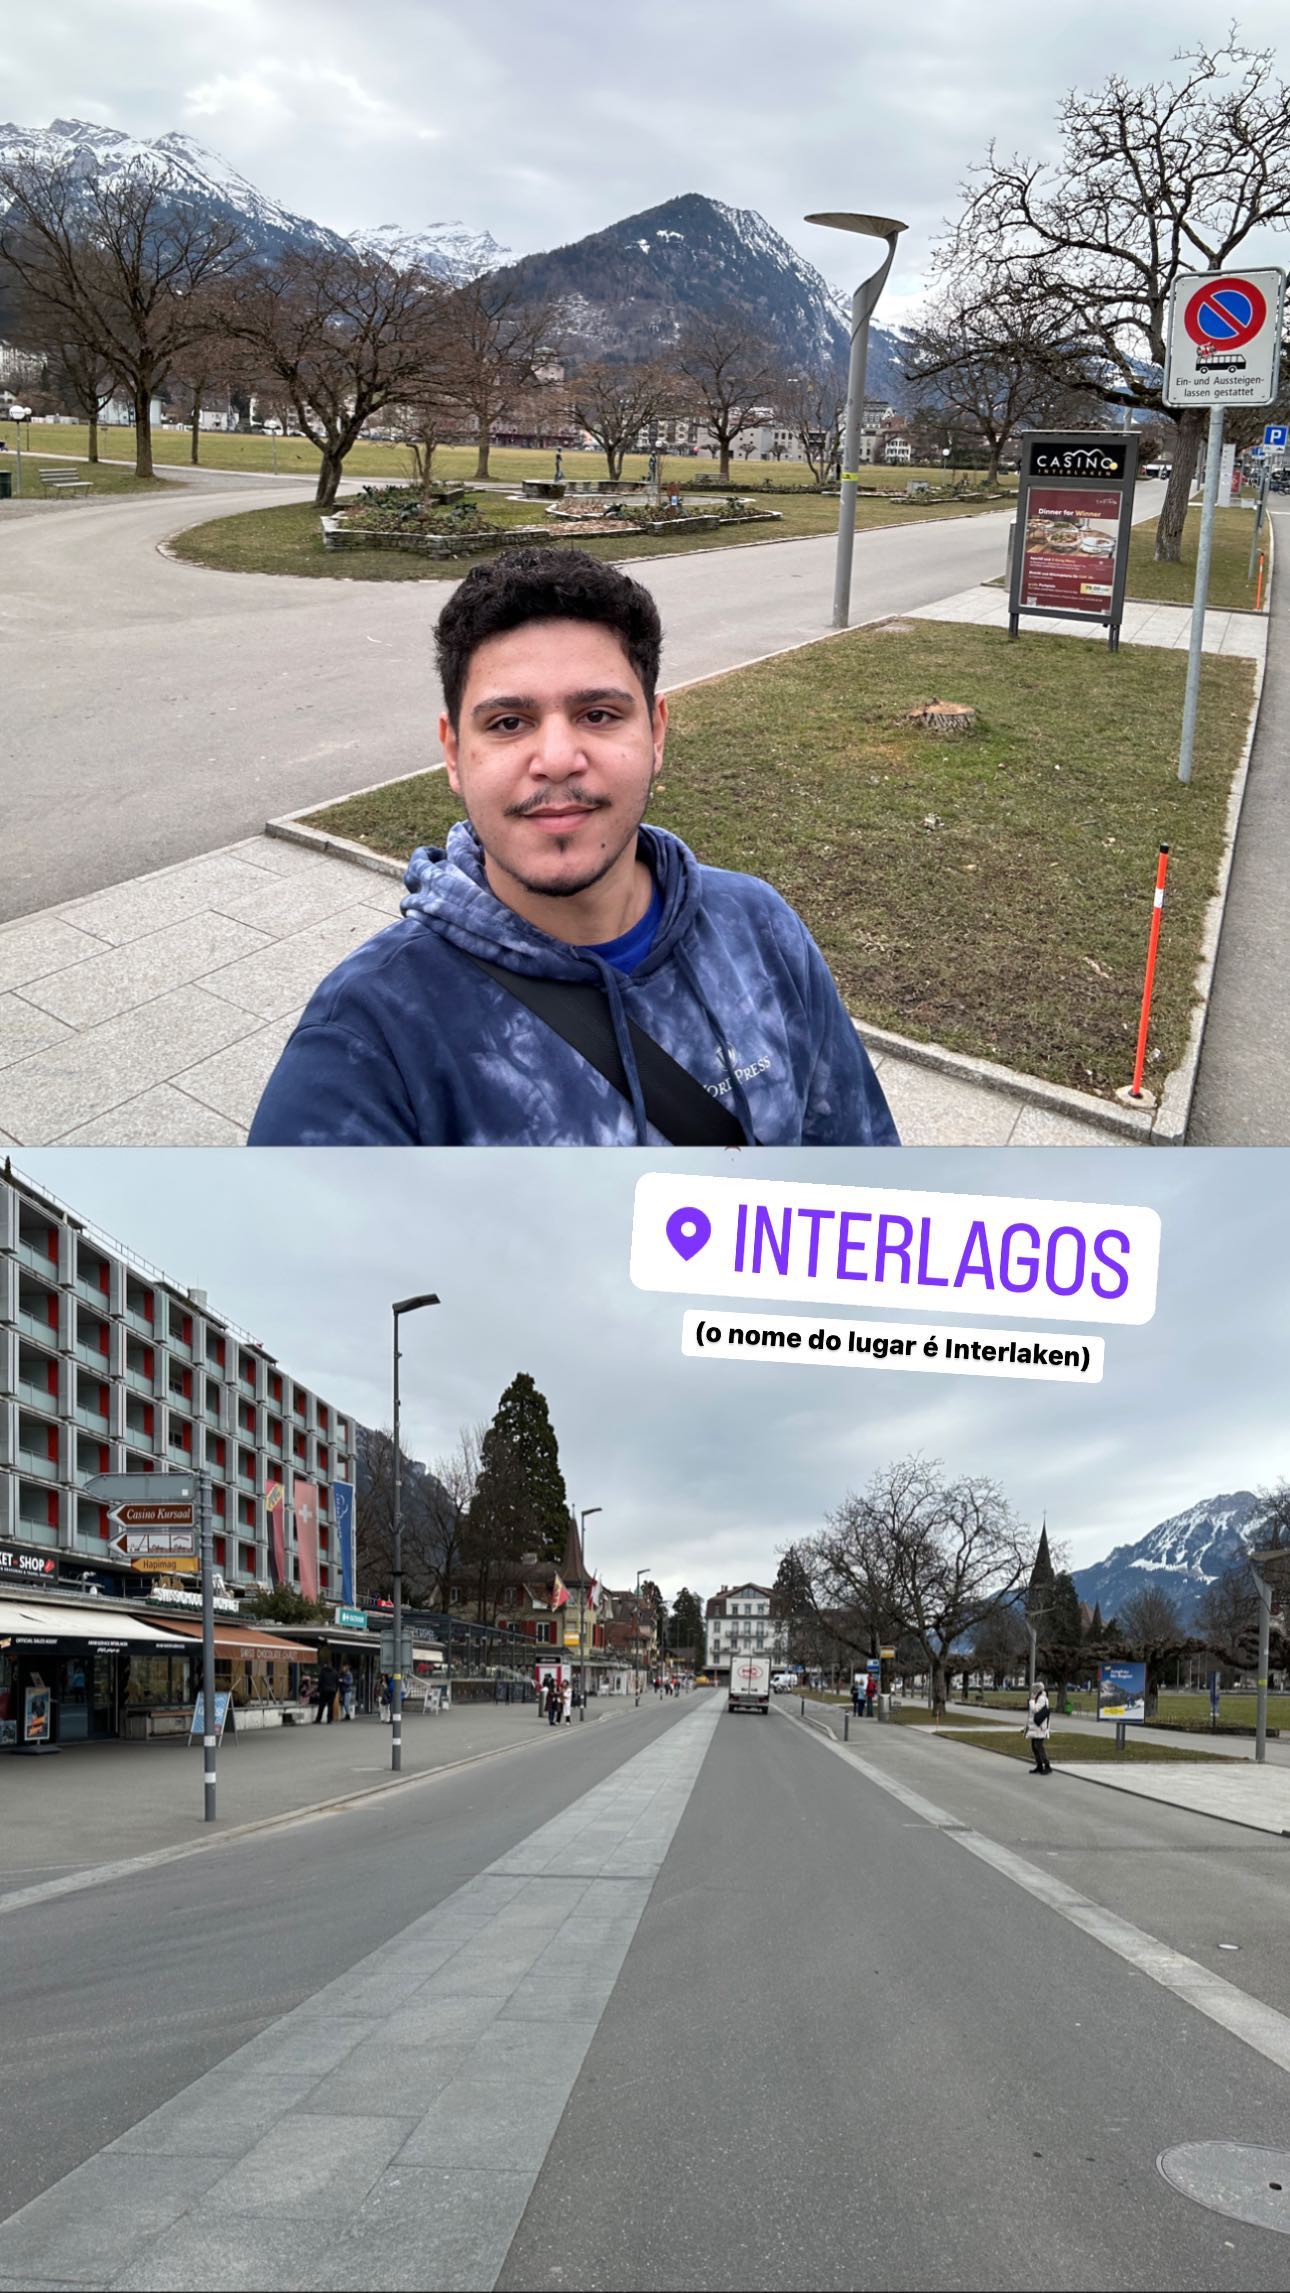 (the name of the place is Interlaken)